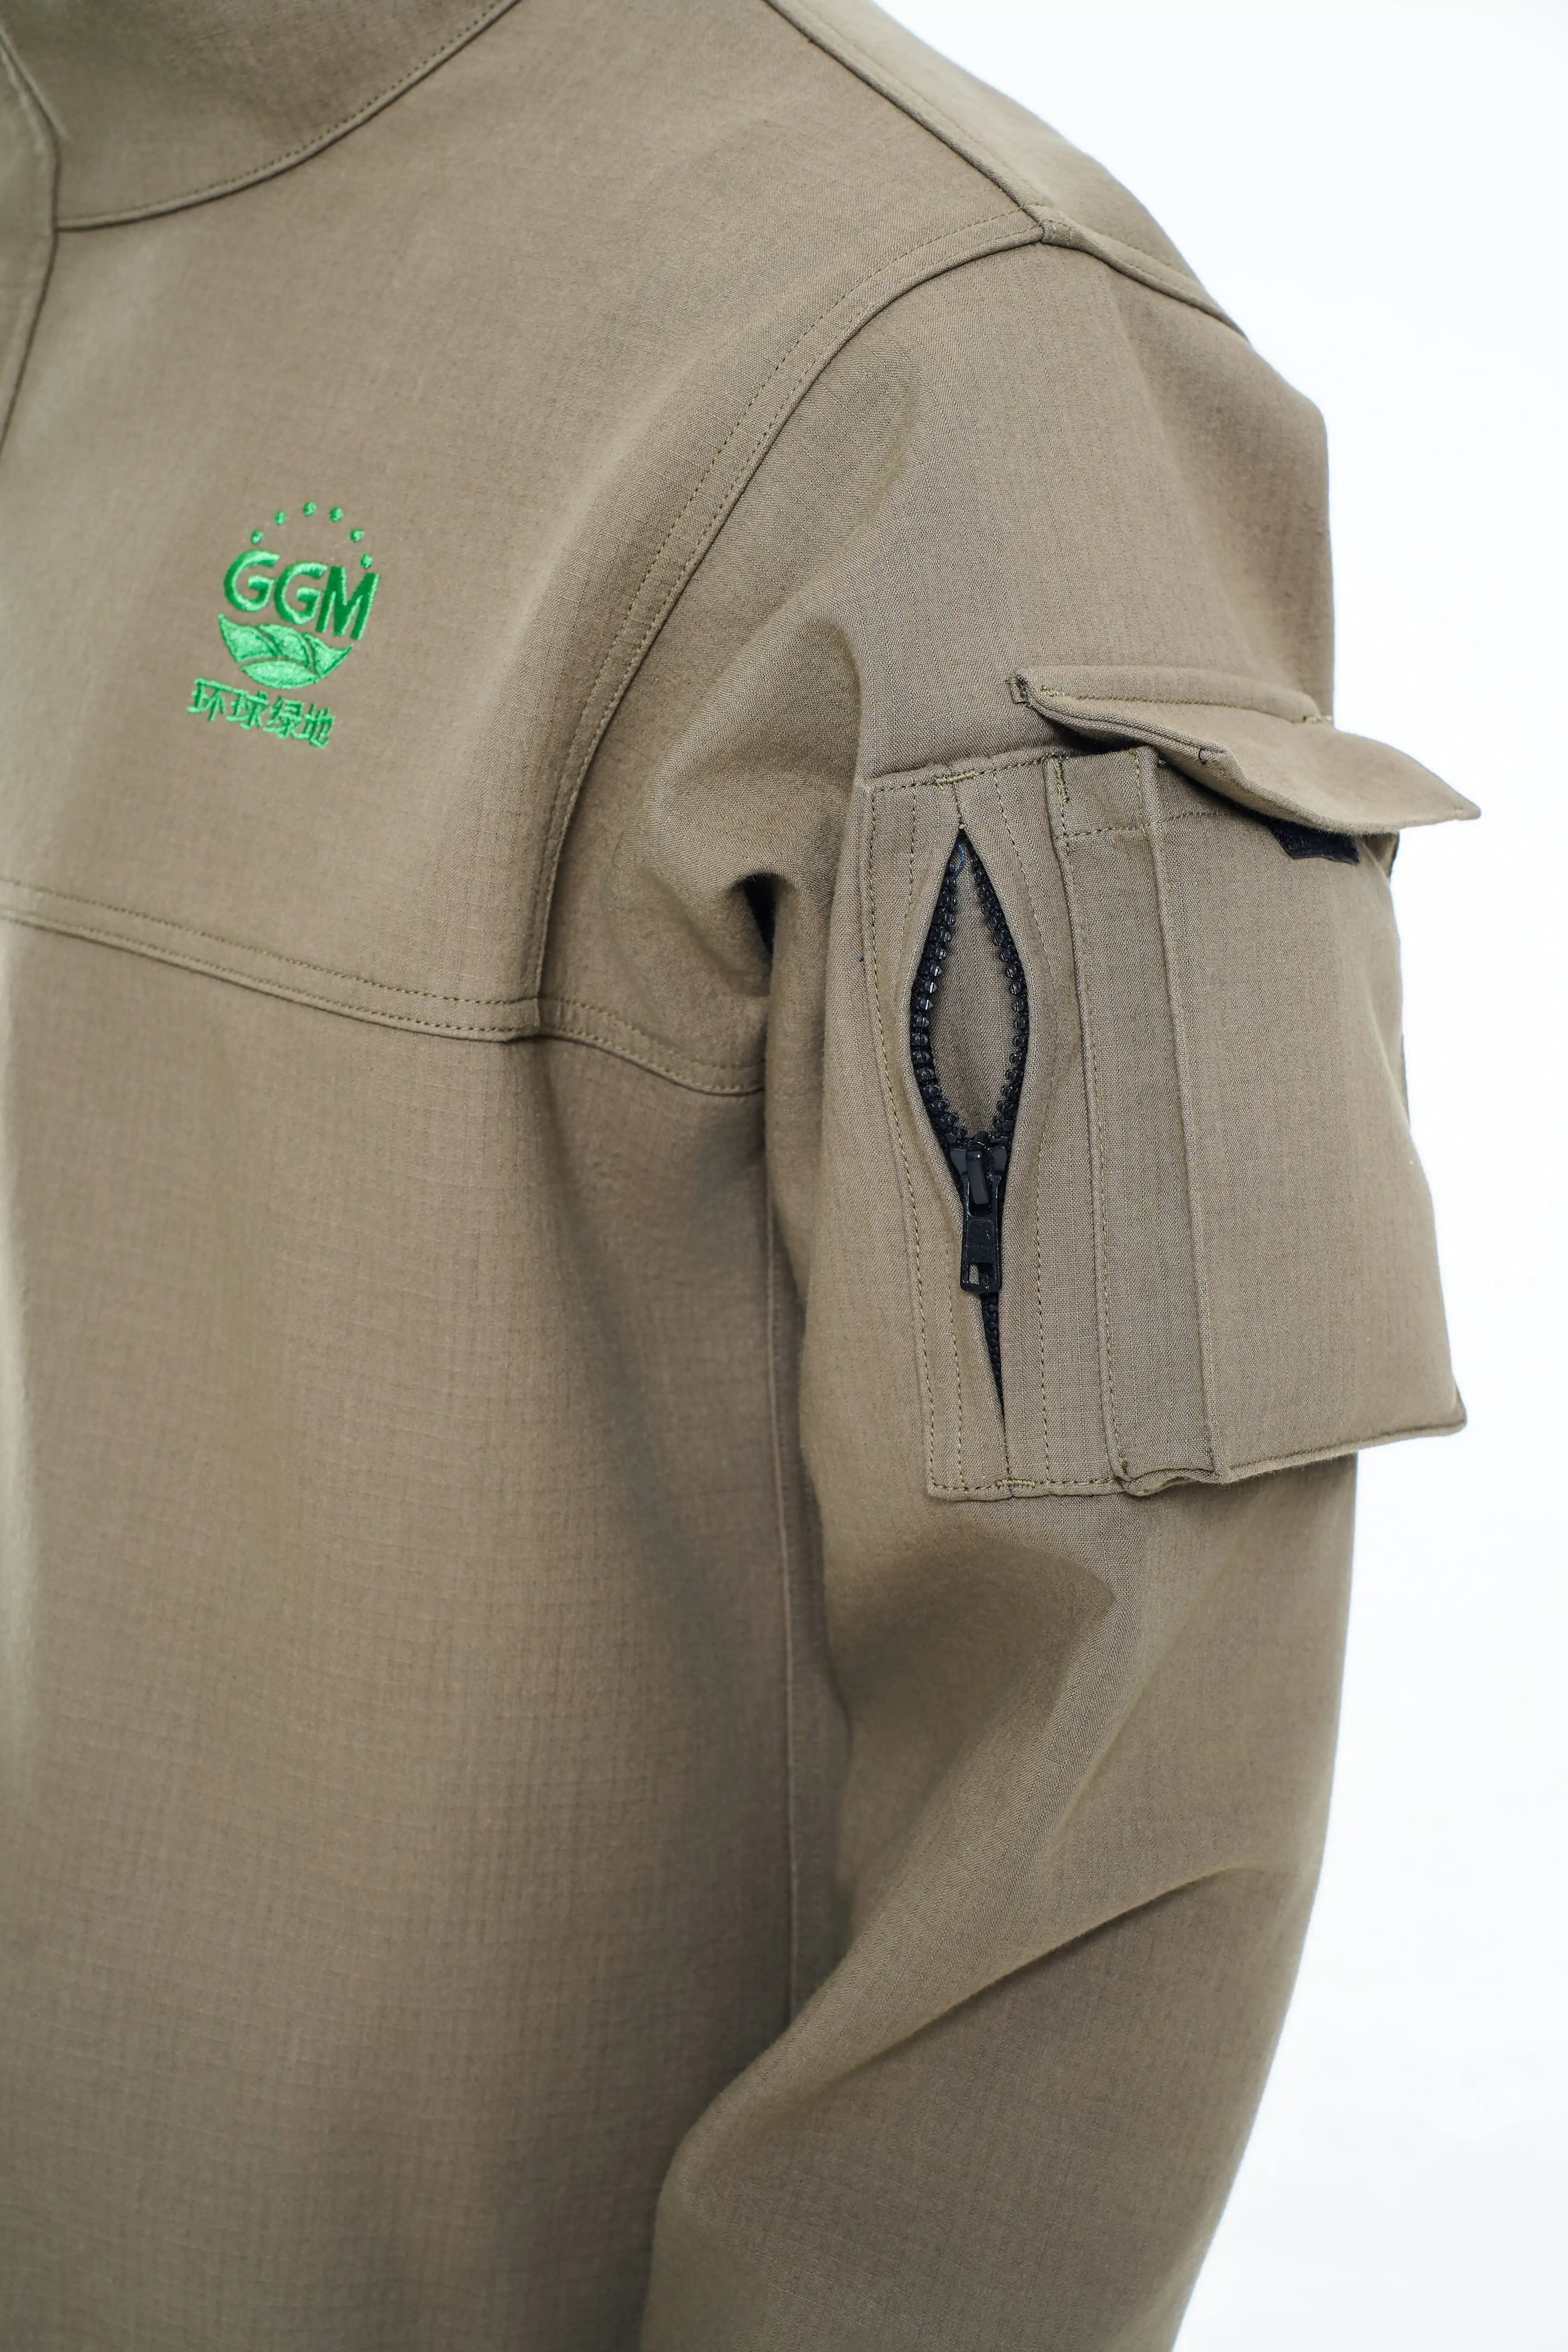 GGM-02 CBRN Tactical Defense Gear With Enhanced Durability And 10-Year Wearability In Non-Threat Conditions